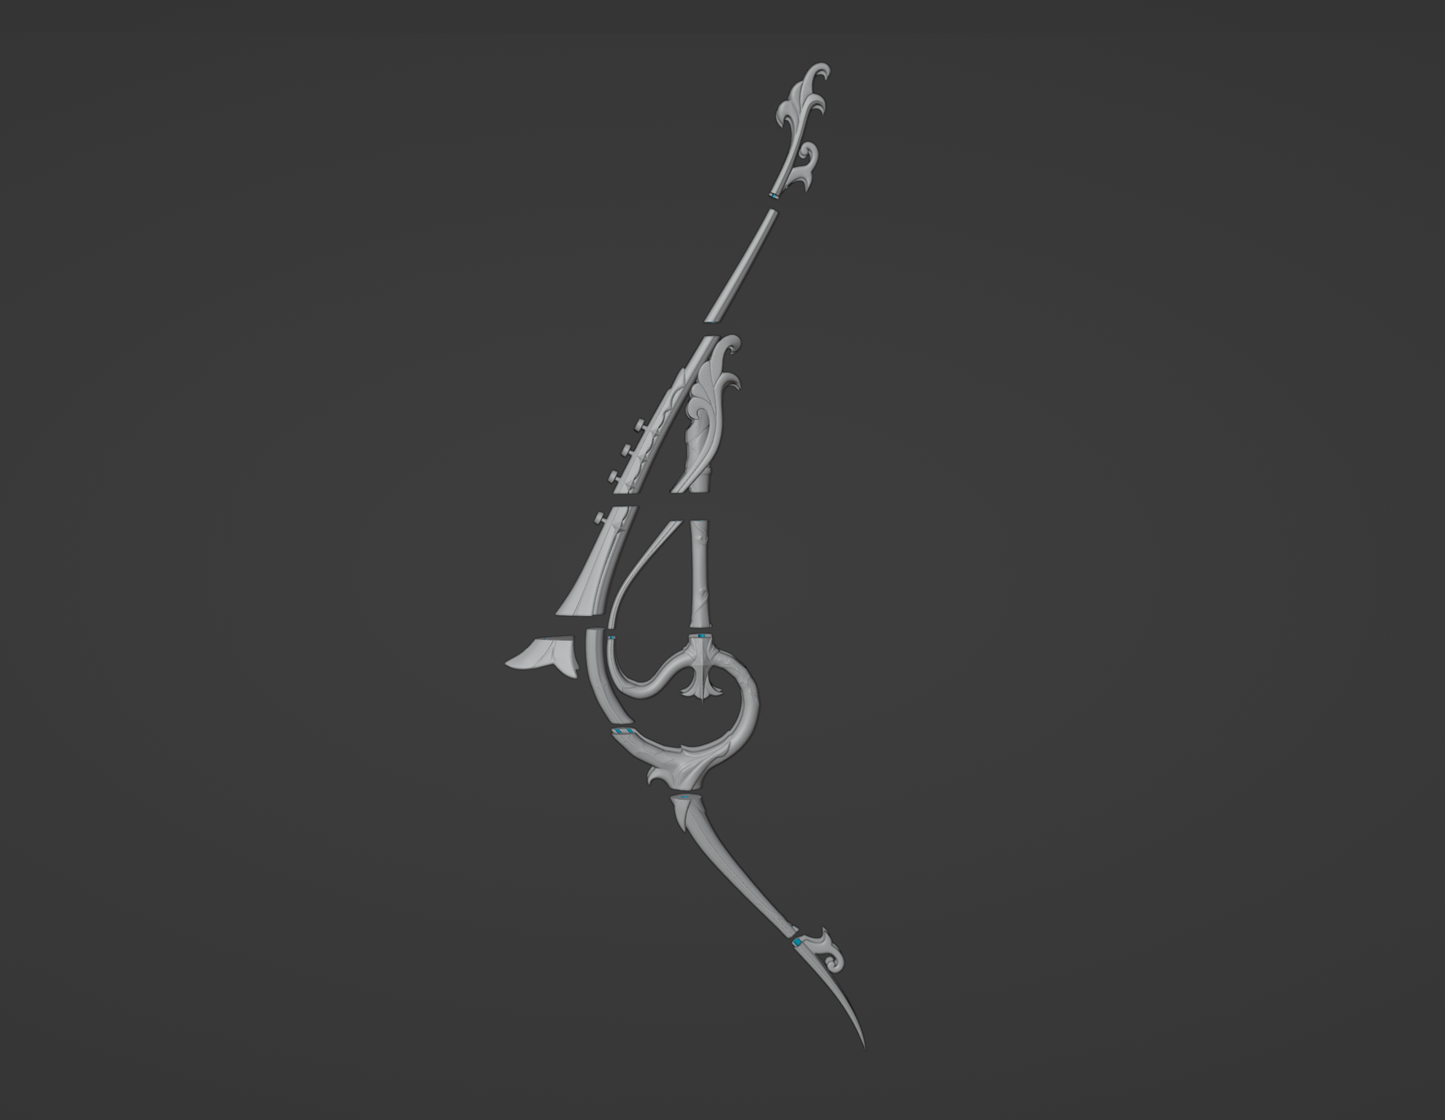 Stringless Bow - Digital 3D Model Files and Physical 3D Printed Kit Options - Venti Cosplay